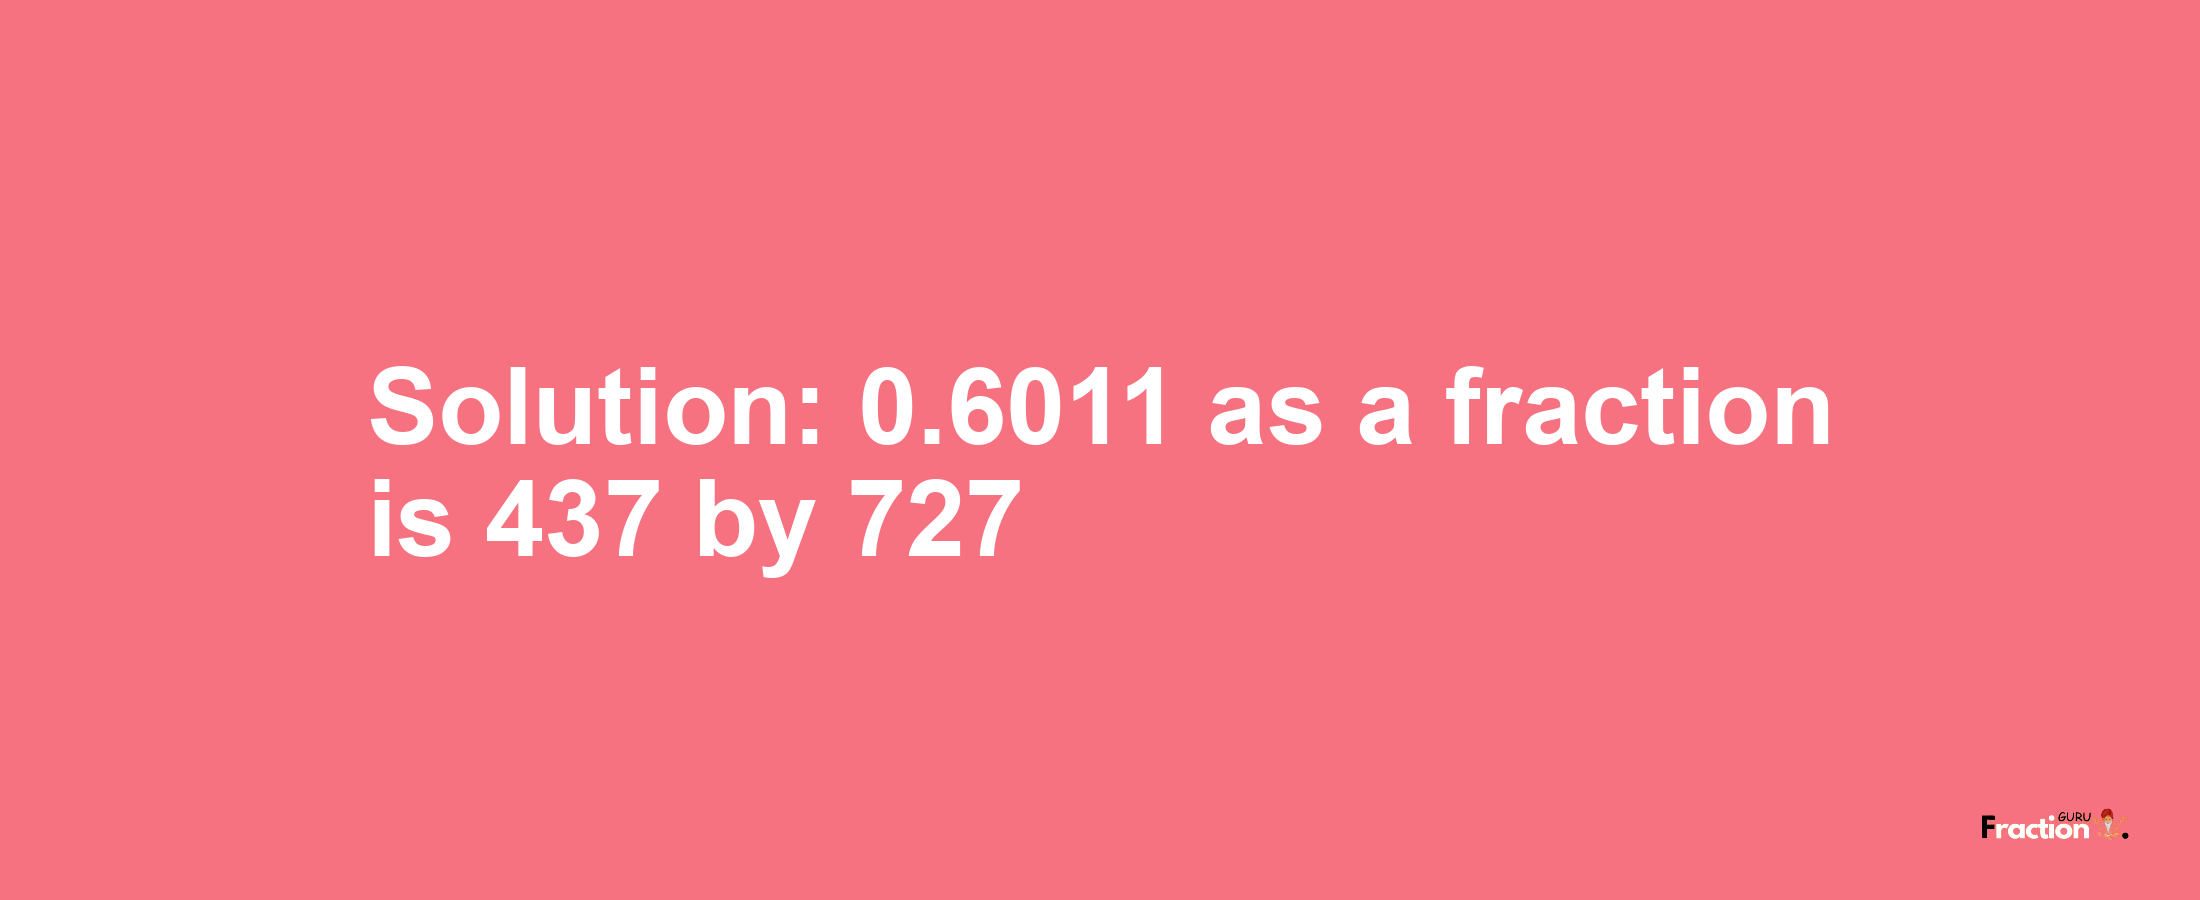 Solution:0.6011 as a fraction is 437/727